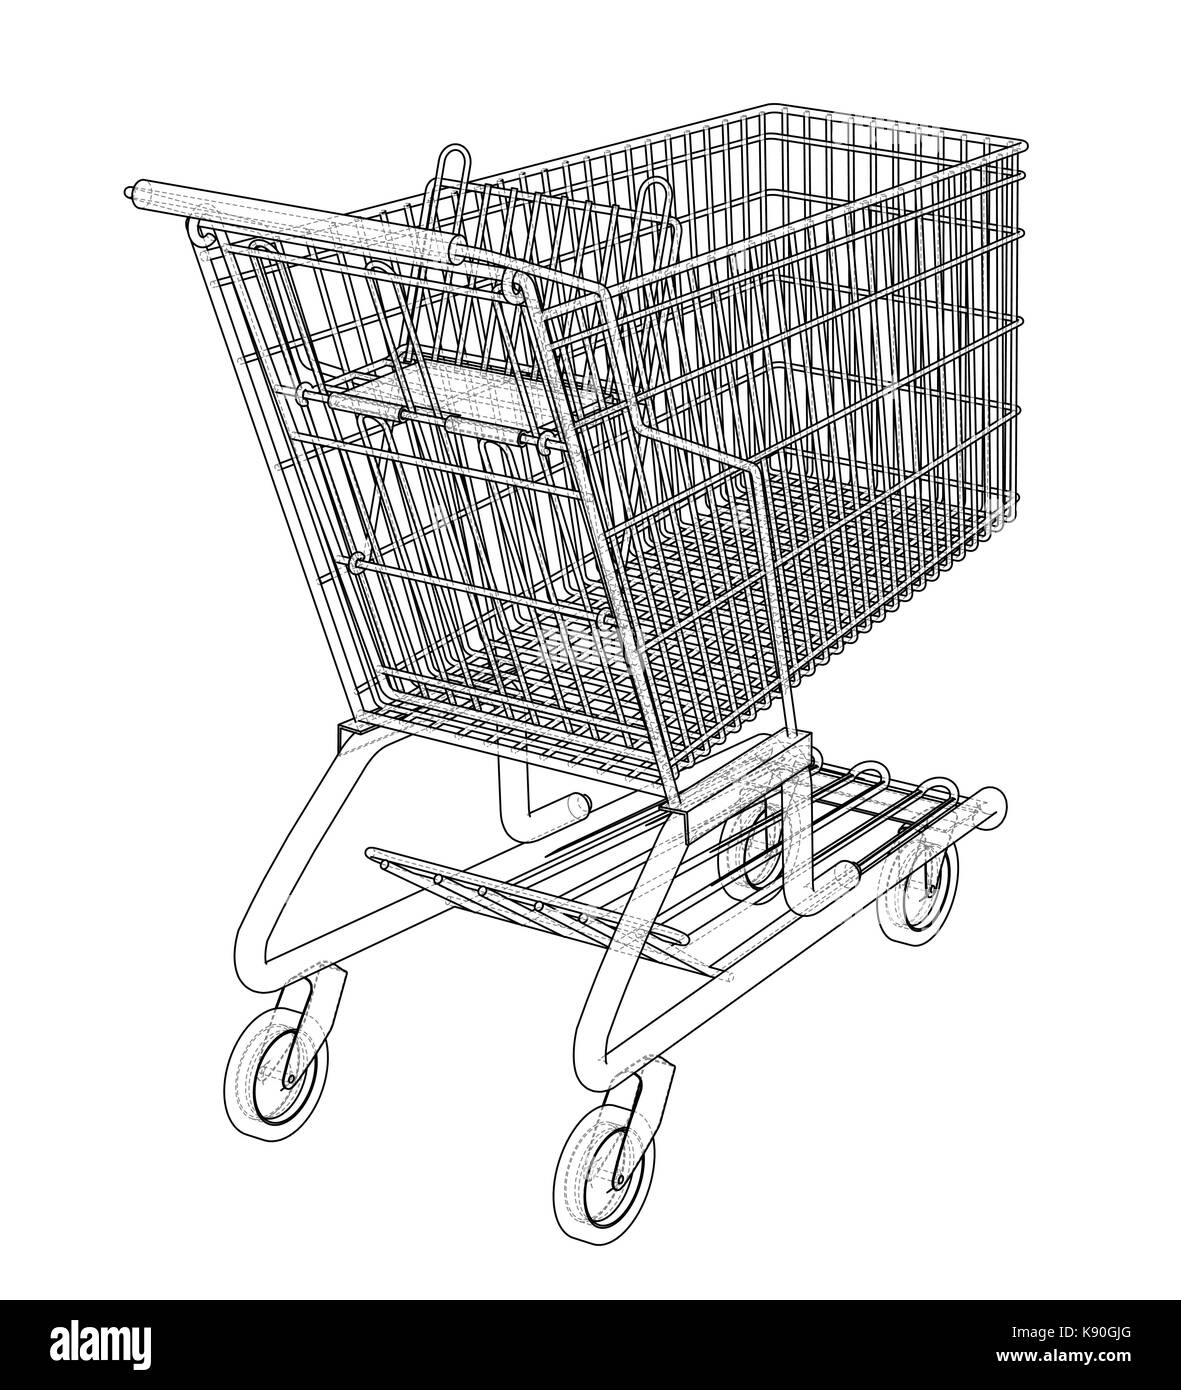 Vector Illustration of Supermarket Shopping Cart Hand Drawing Style Stock  Vector  Illustration of retail icon 176082633